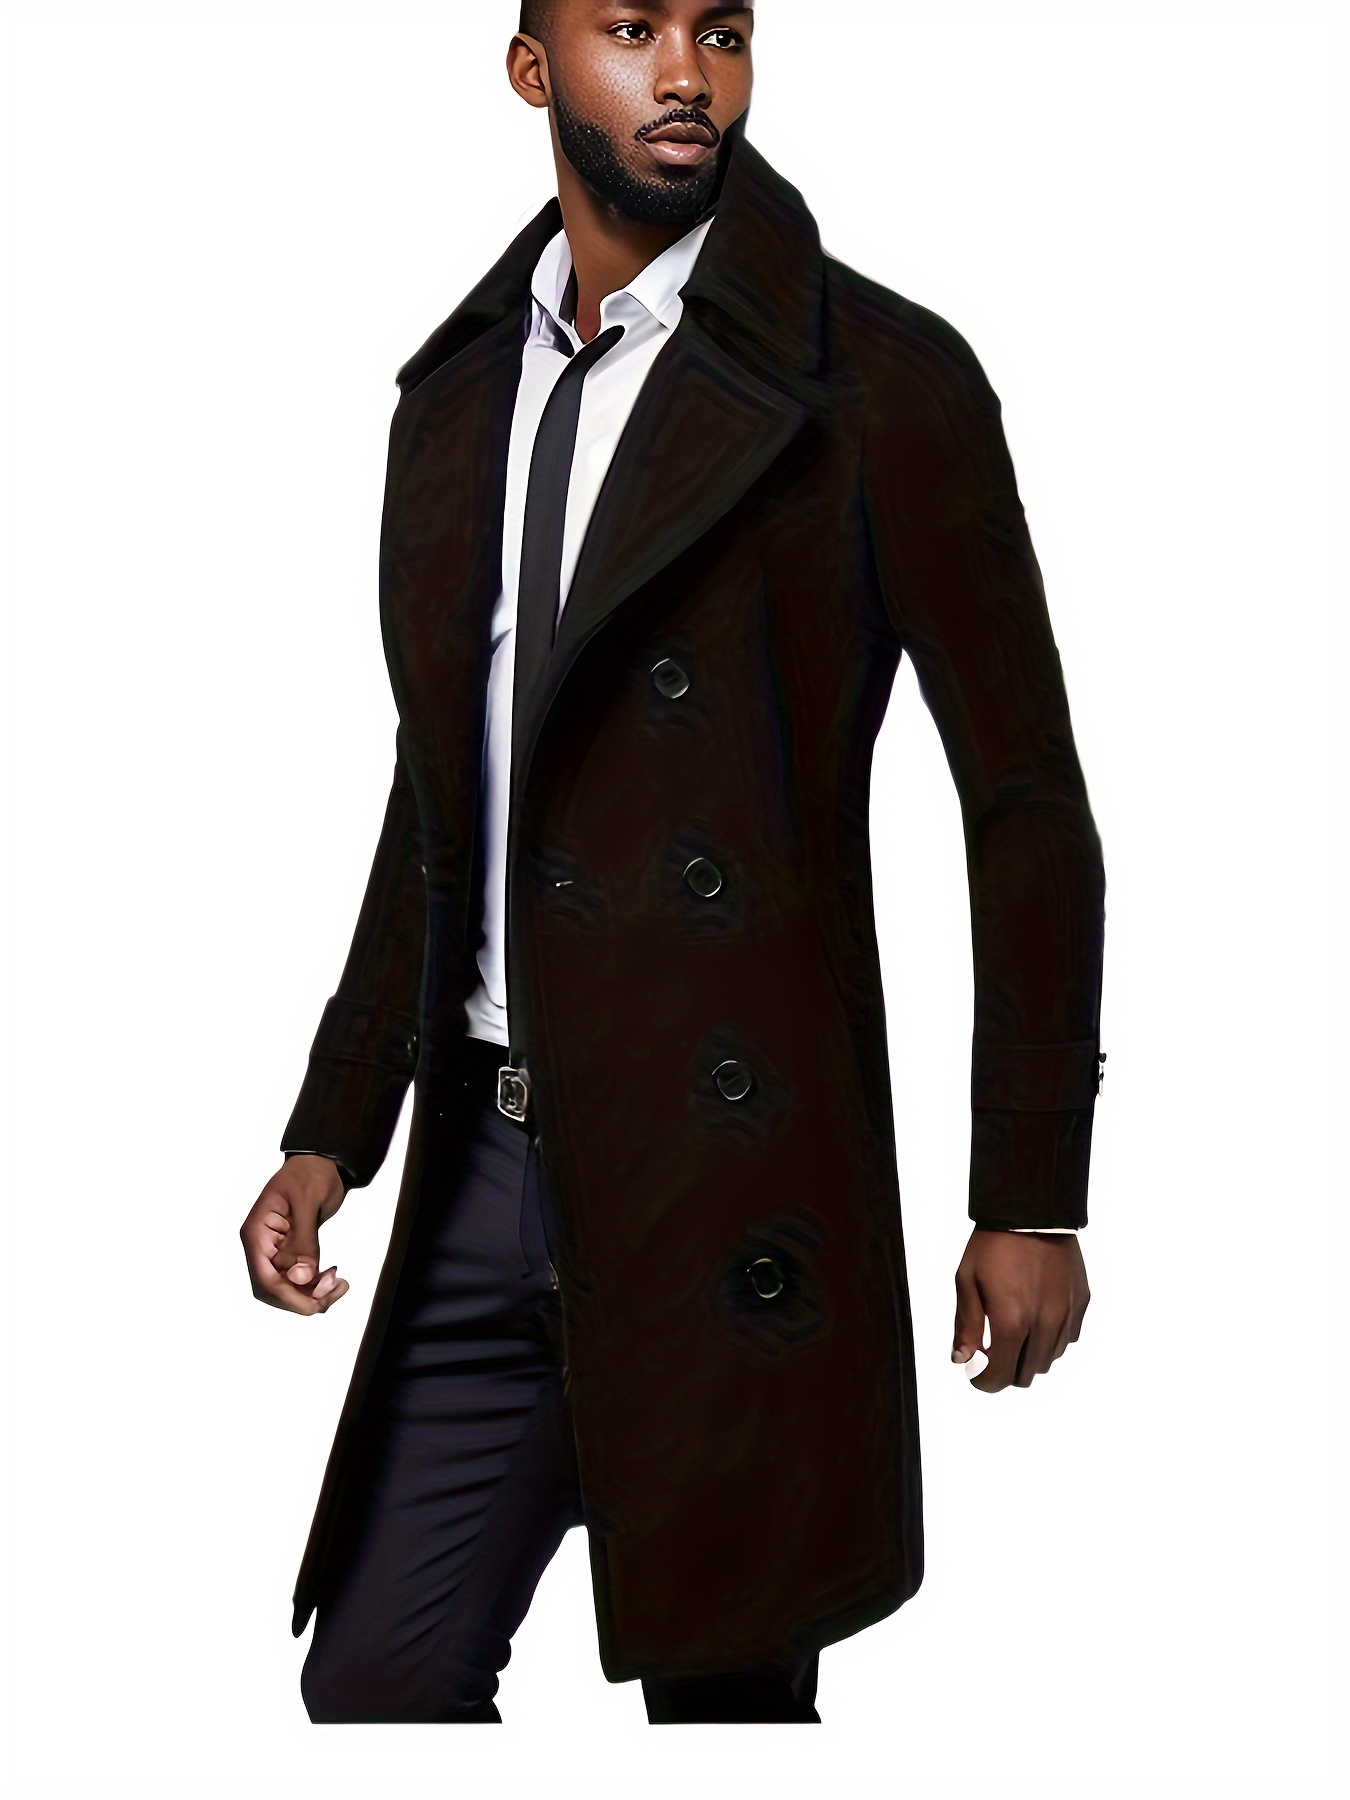 Plus Size Men's Fashion Fleece Coat For Autumn/winter, Double-breasted  Lapel Coat, Mid-length Windbreaker For Big & Tall Males